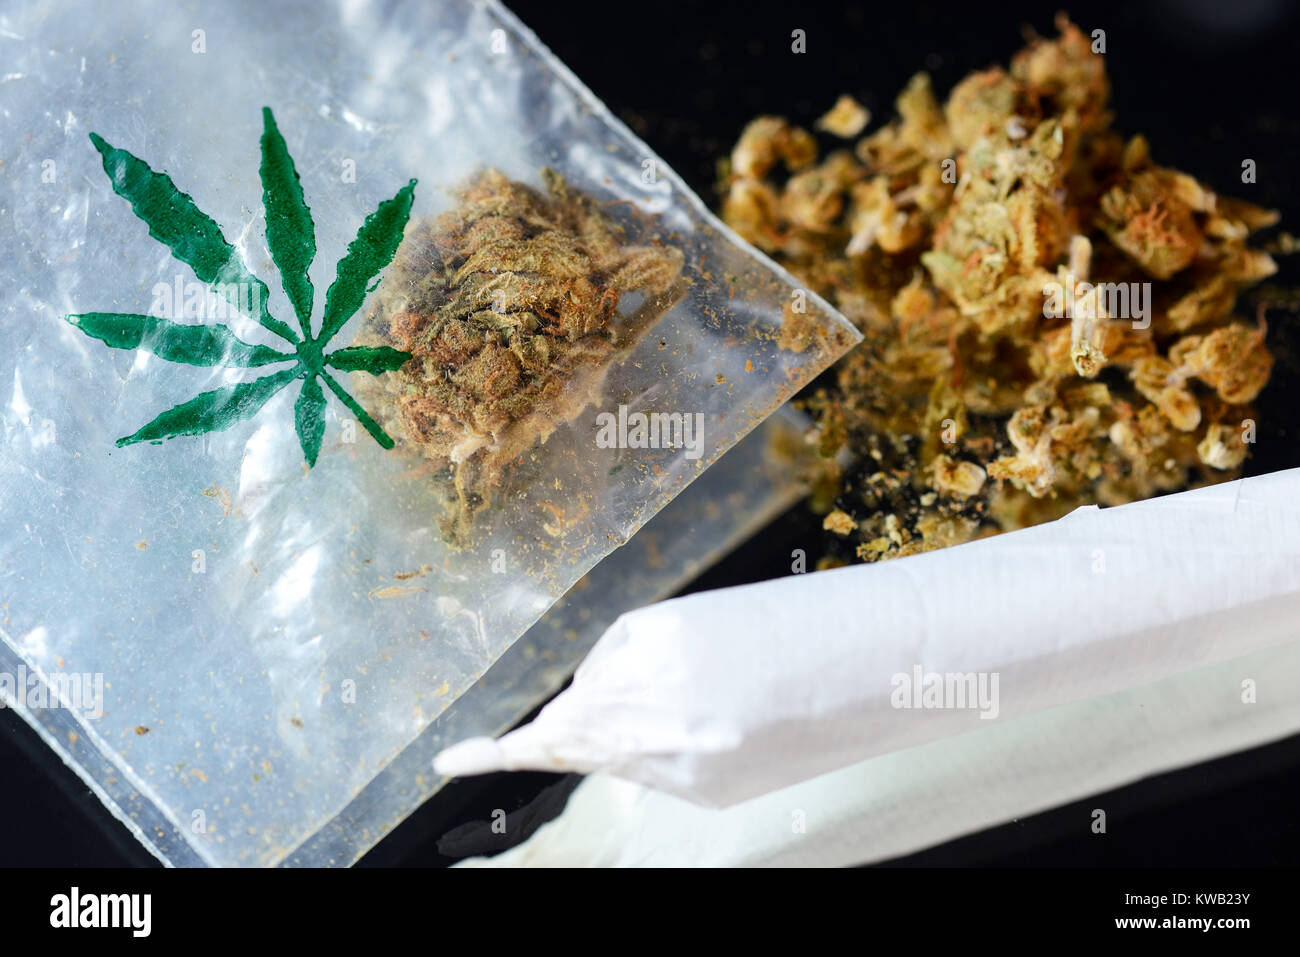 Joint and cannabis, Joint und Cannabis Stock Photo